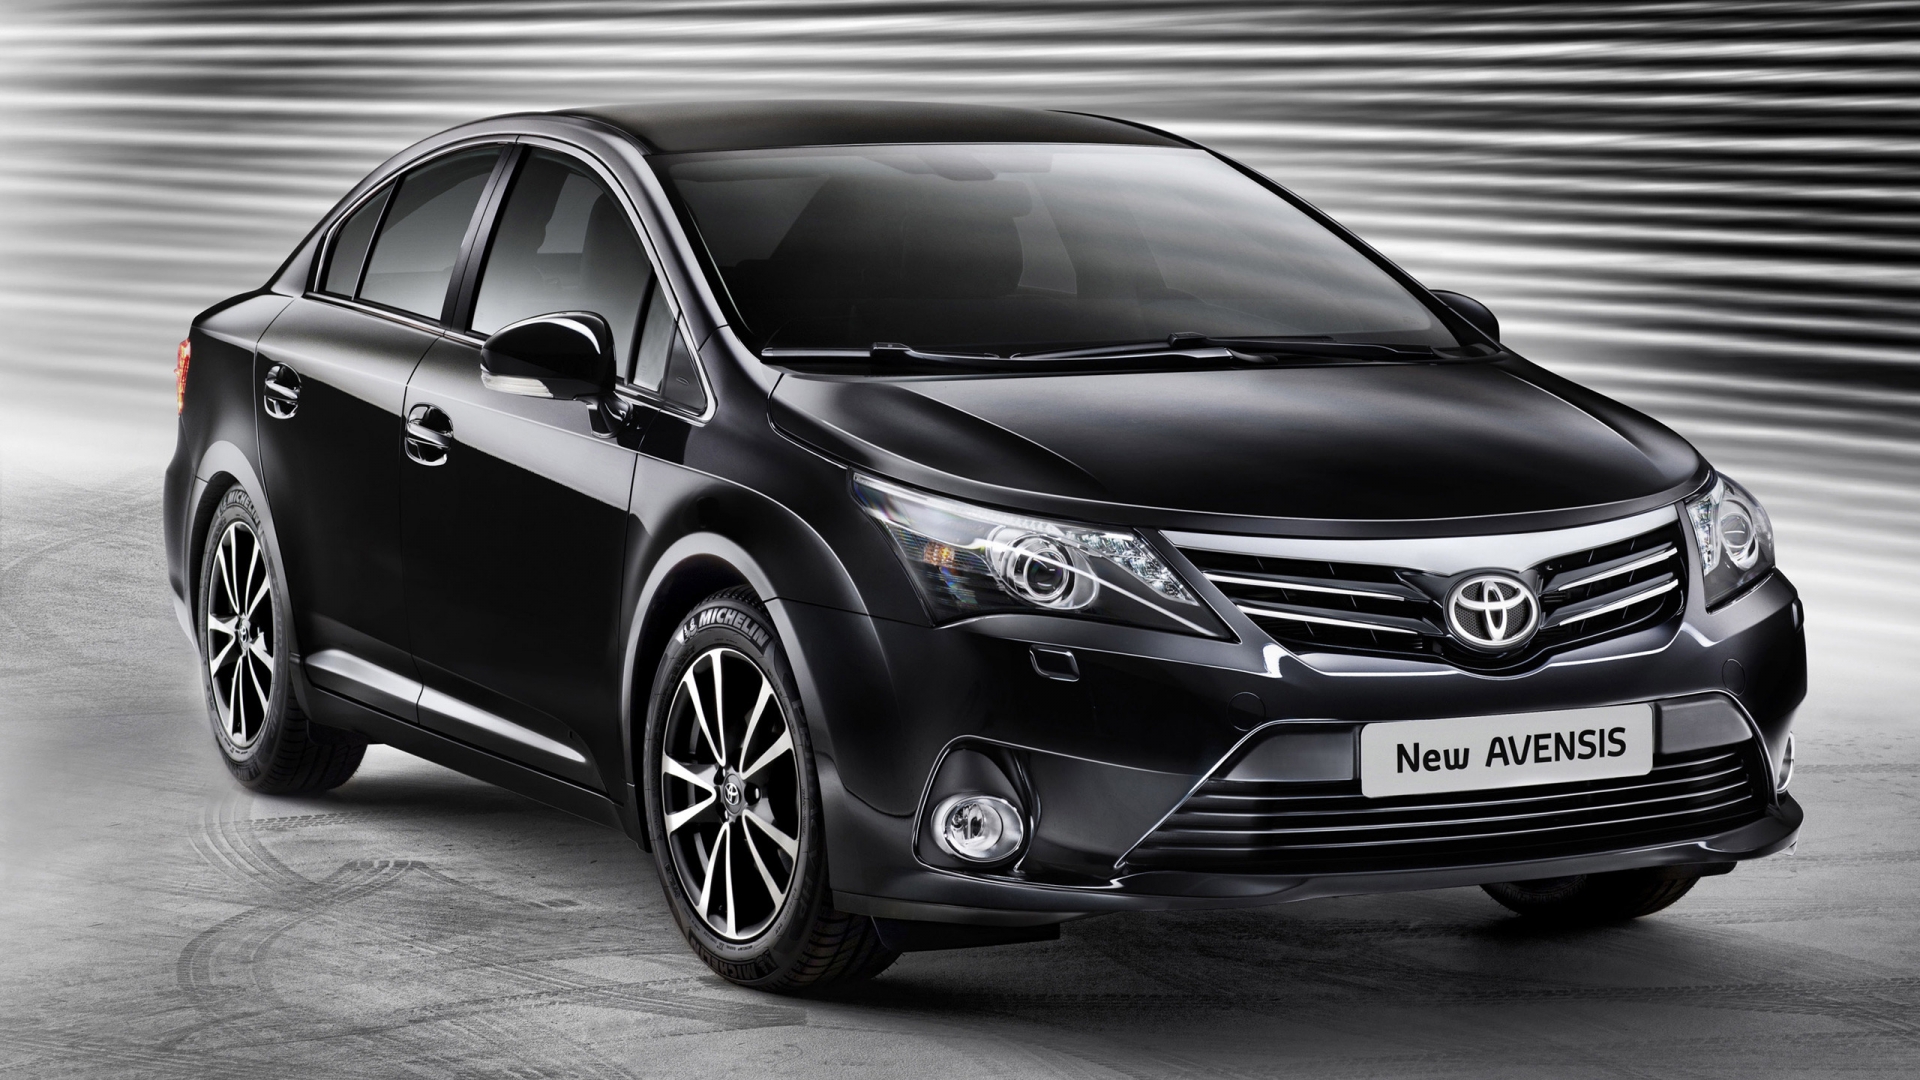 2012 Toyota Avensis for 1920 x 1080 HDTV 1080p resolution